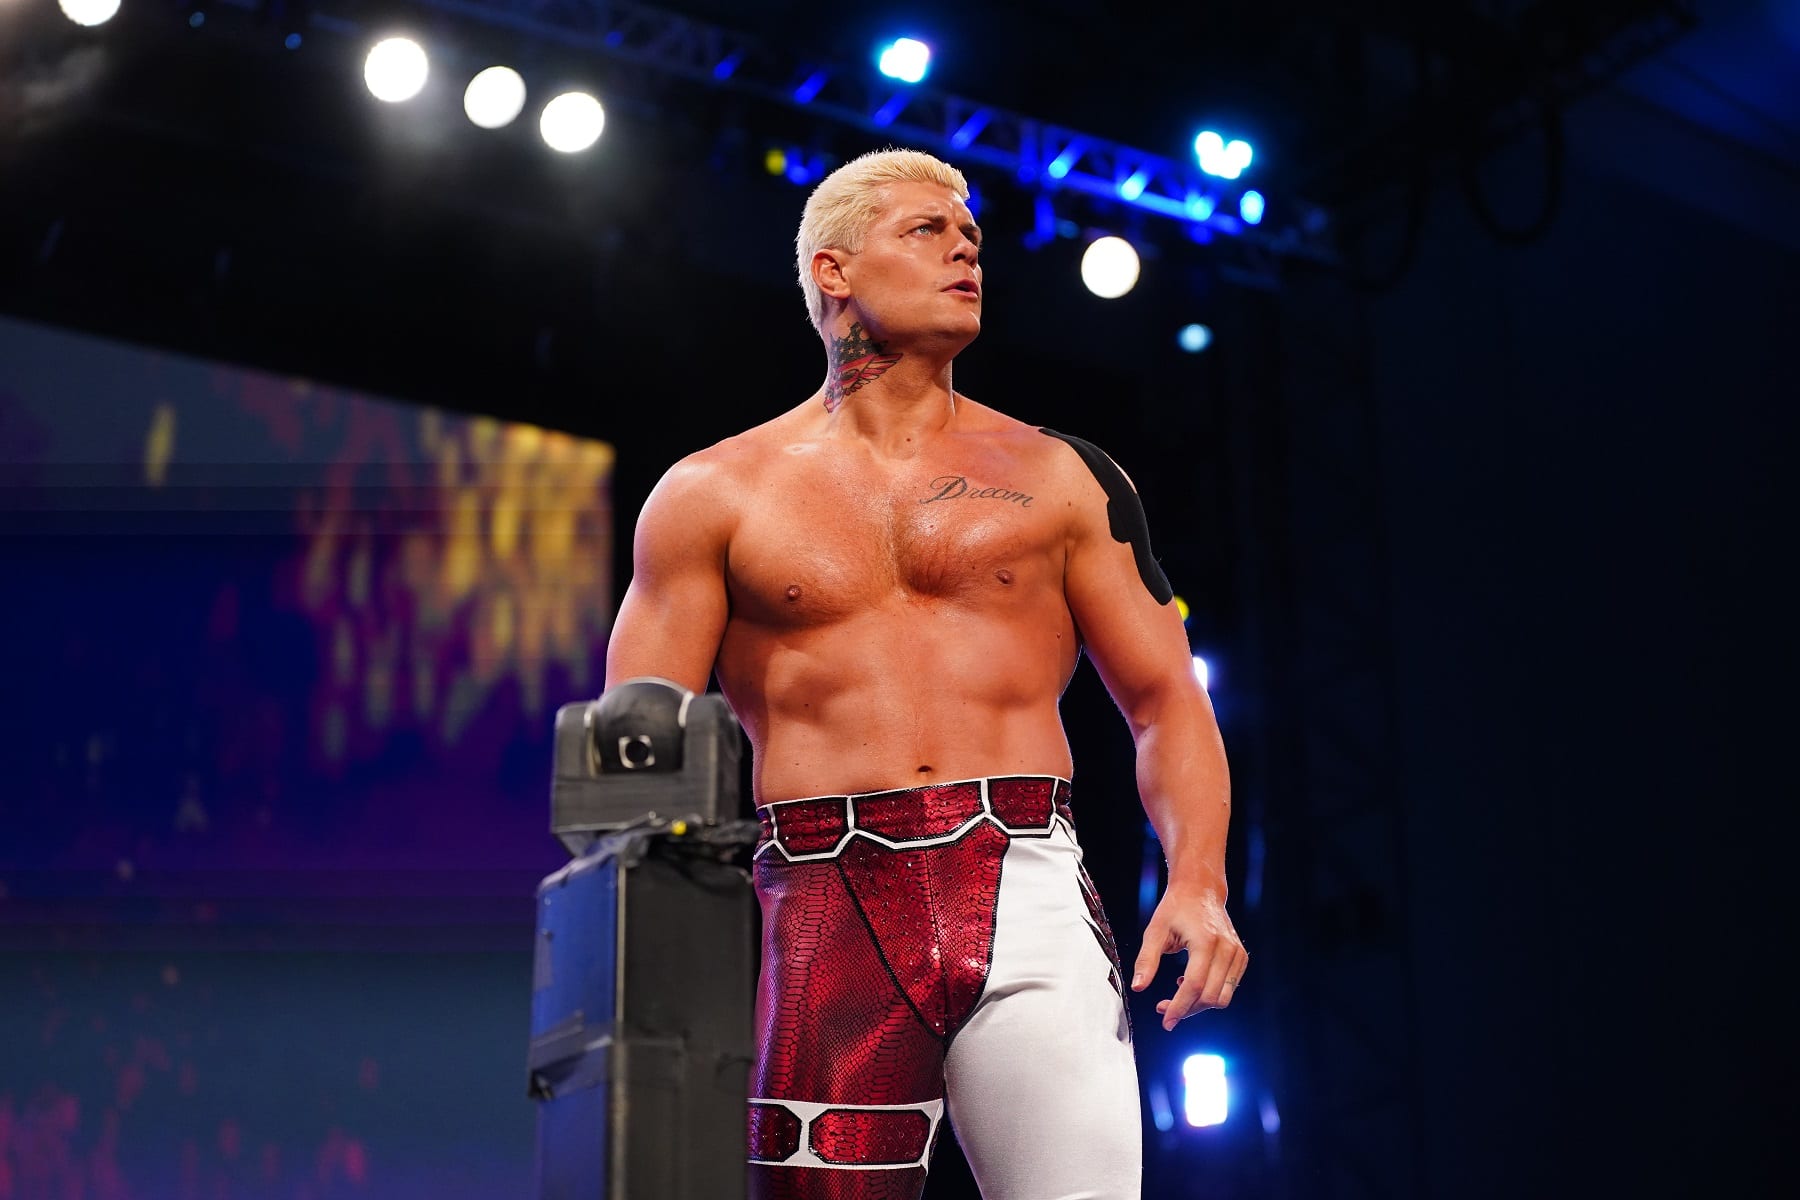 Cody Rhodes 2023 - Net Worth, Salary, Records and Personal Life